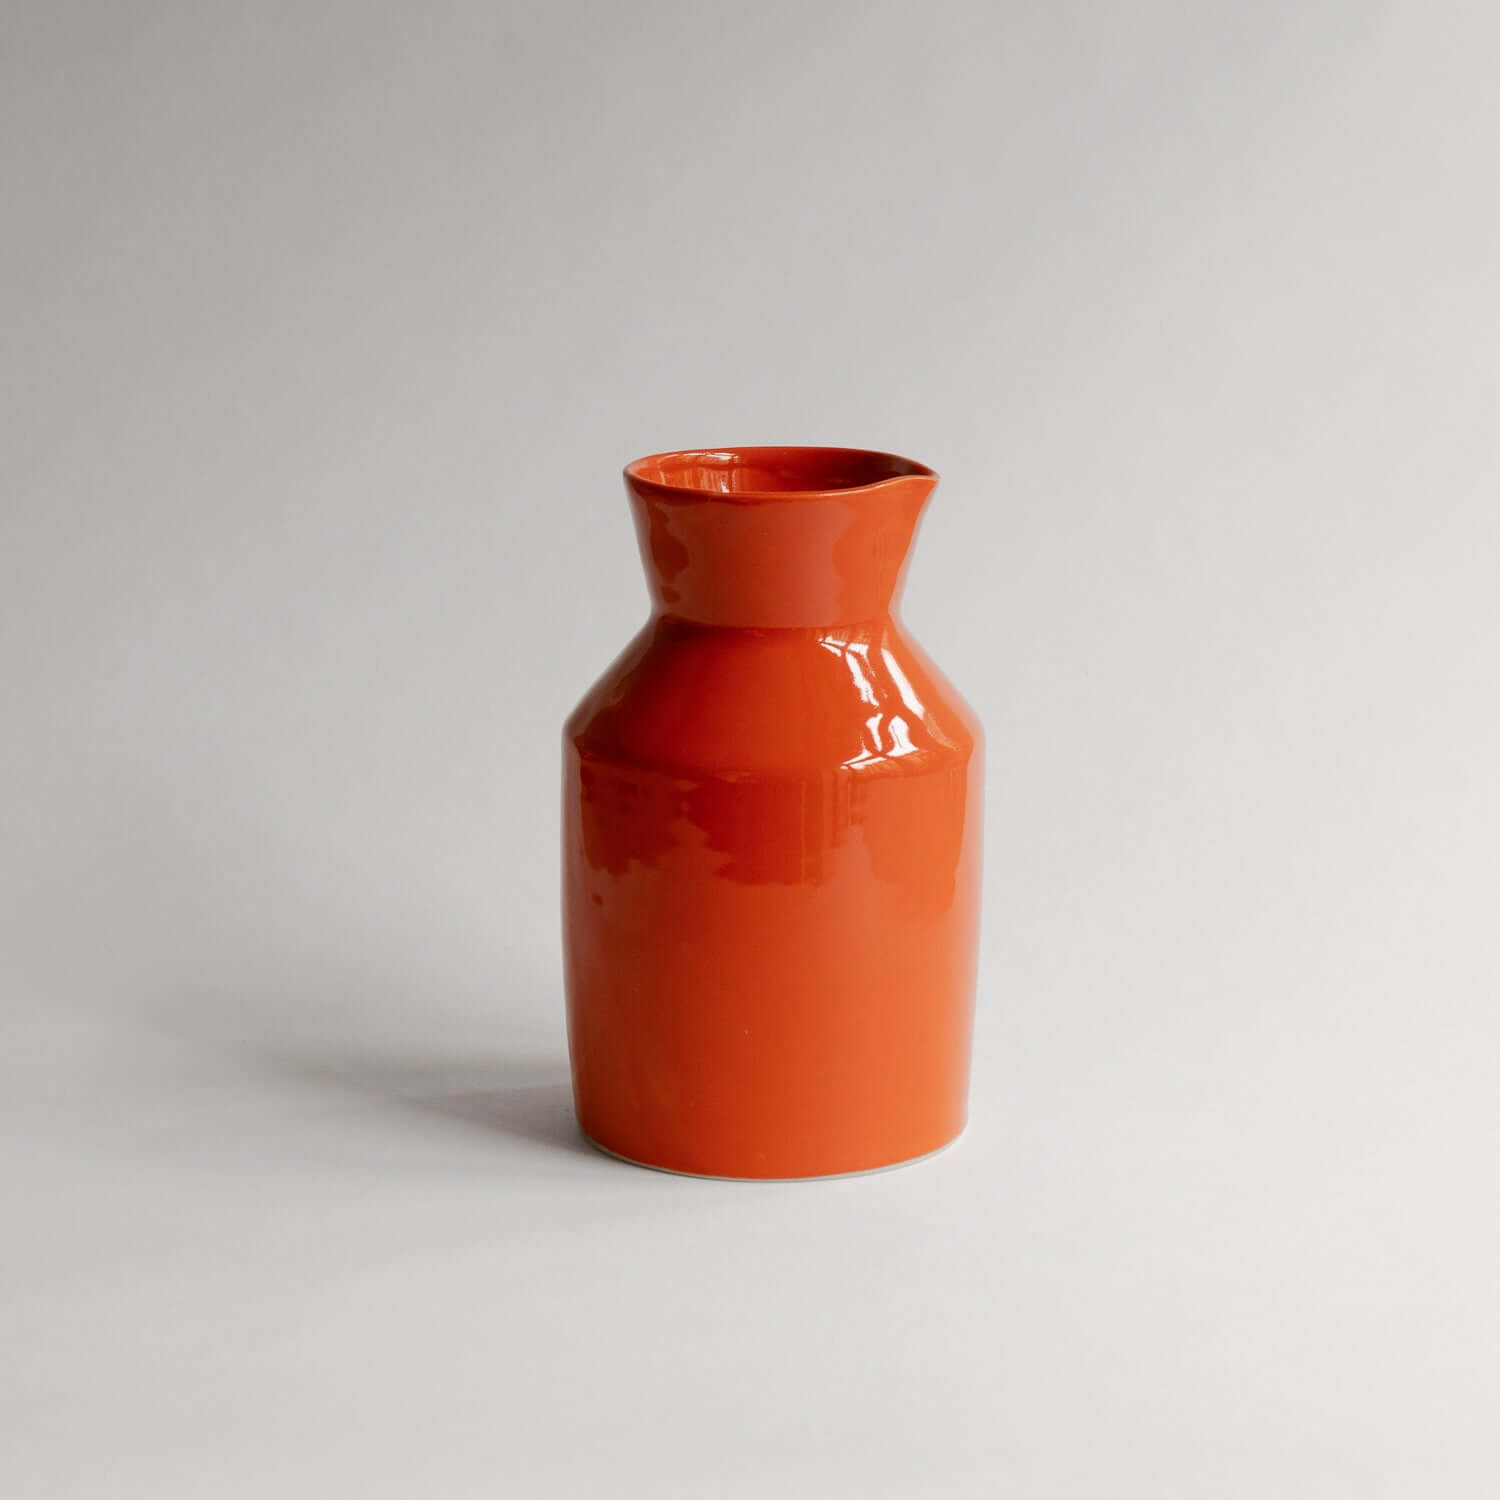 Elevate your daily life with our Tuva Pitcher. Perfect as a vase, a pitcher or simply decor. It holds 1L, with a beautiful red glaze inside. Handmade with love. von viola beuscher ceramics